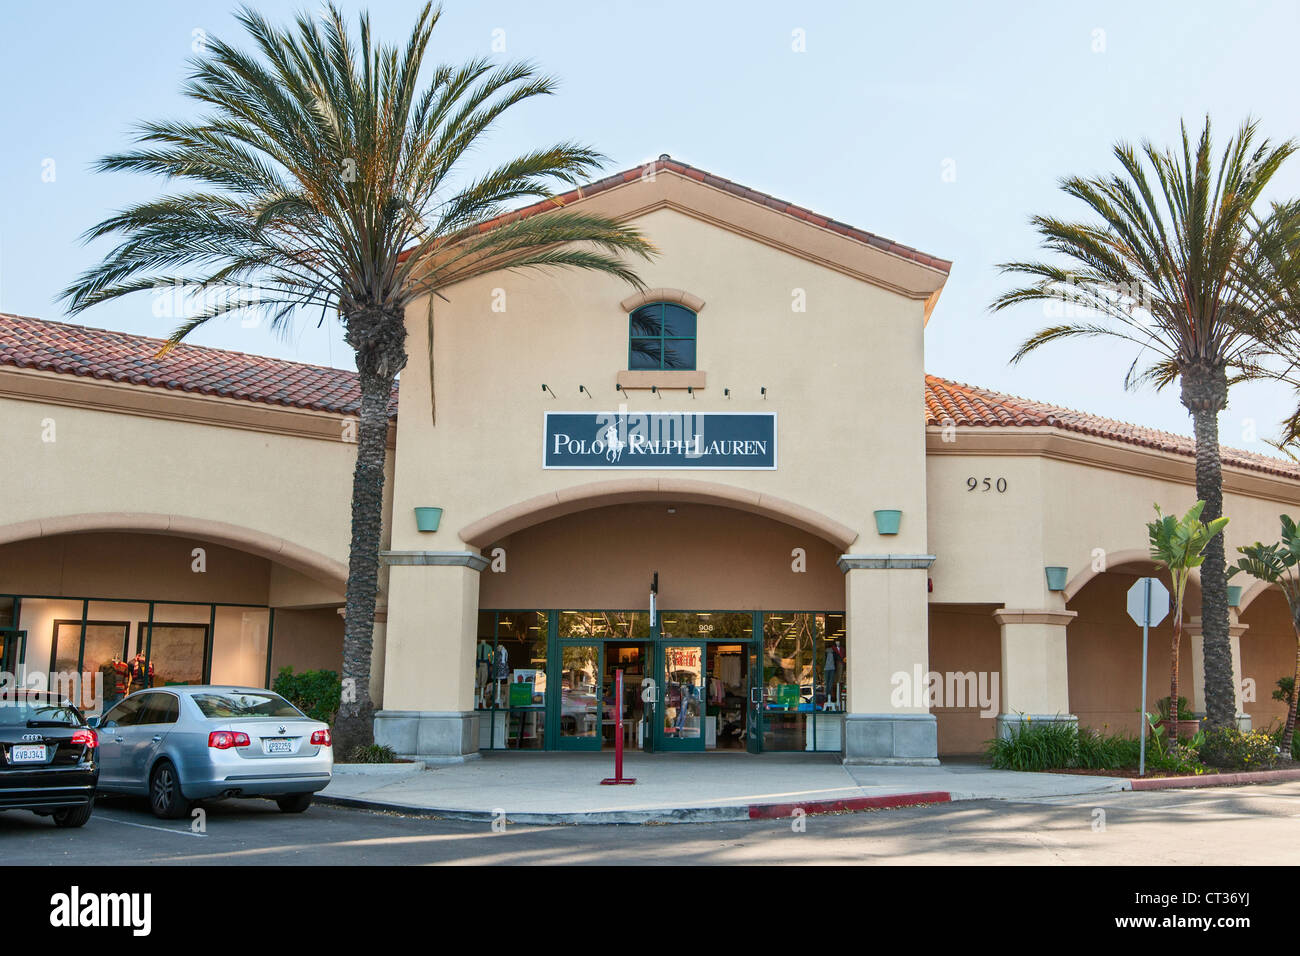 A Saks Fifth Avenue outlet store at the Camarillo outlet center in  Camarillo California Stock Photo - Alamy